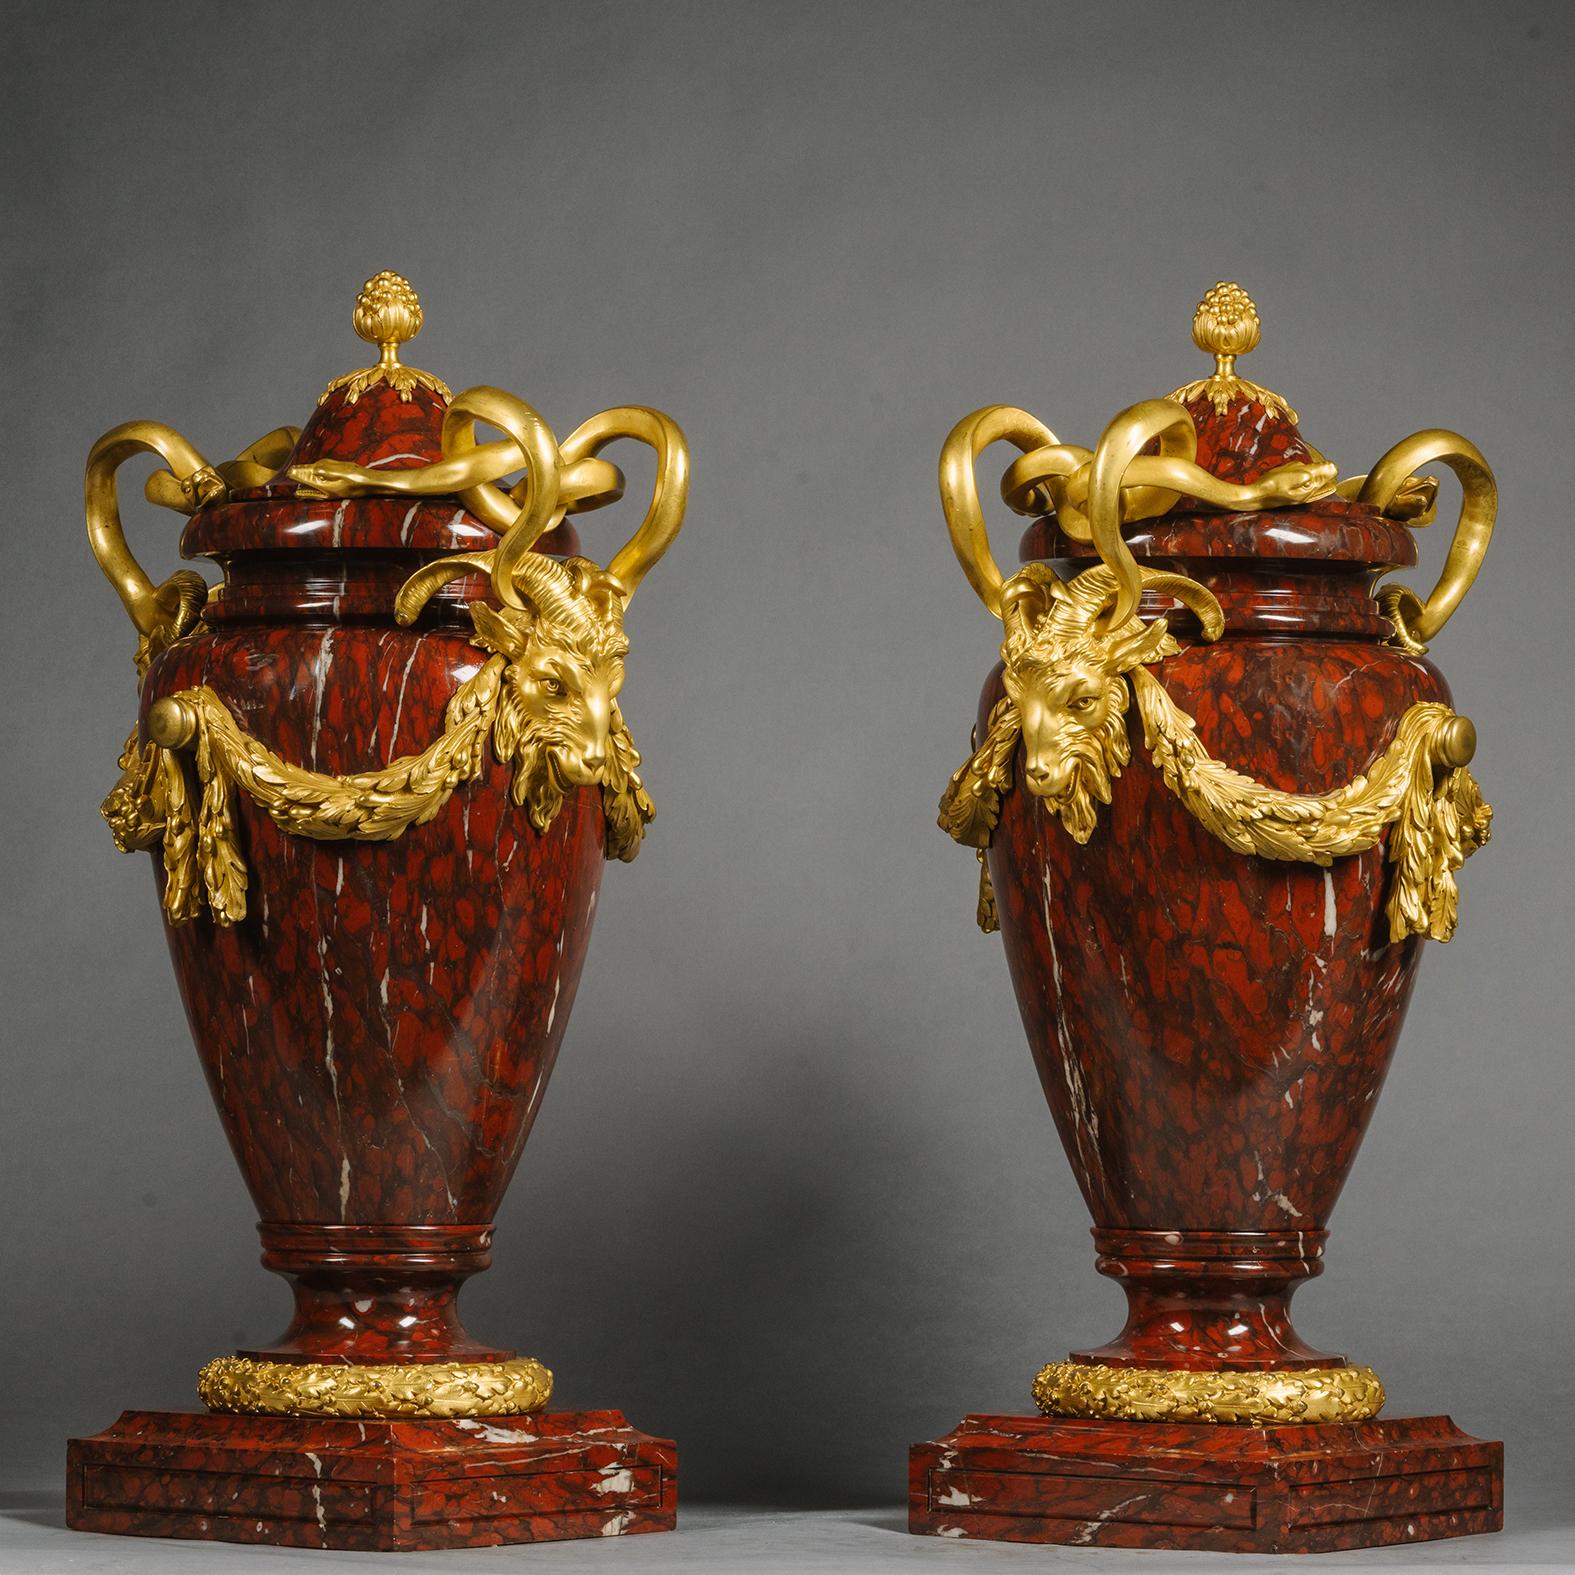 A Pair of Large Louis XVI Style Gilt-Bronze Mounted Rouge Griotte Vases and Covers. 

Designed in the Neoclassical Style with intwined serpent handles above ram’s masks joined by acanthus swags. These palatial vases are amongst the finest examples